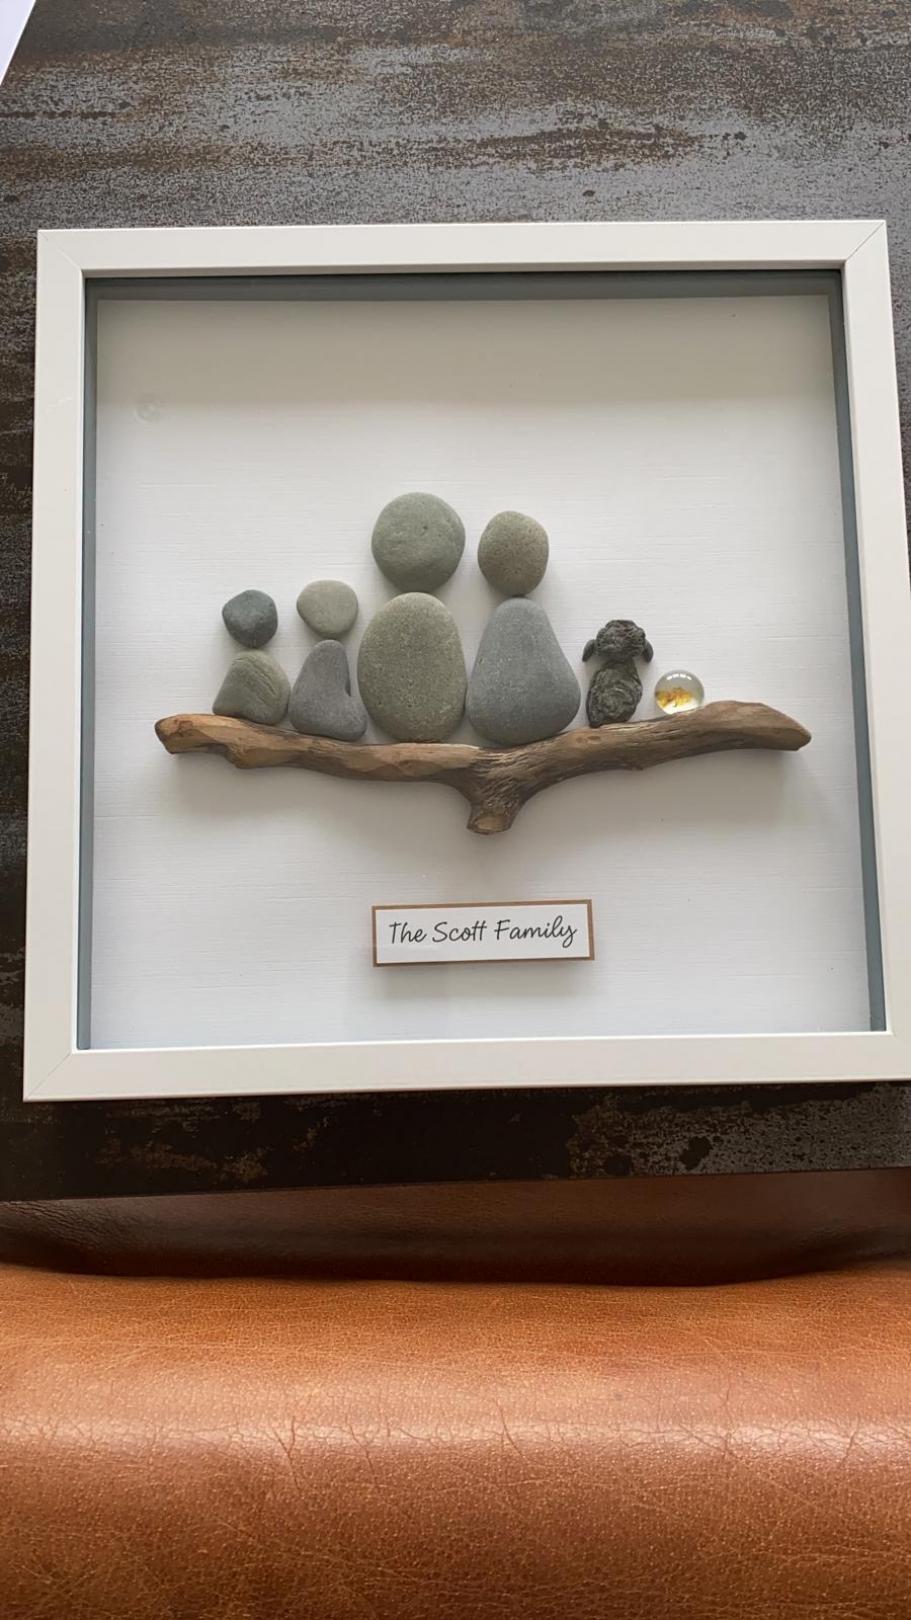 Image of artwork featuring family represented by stones